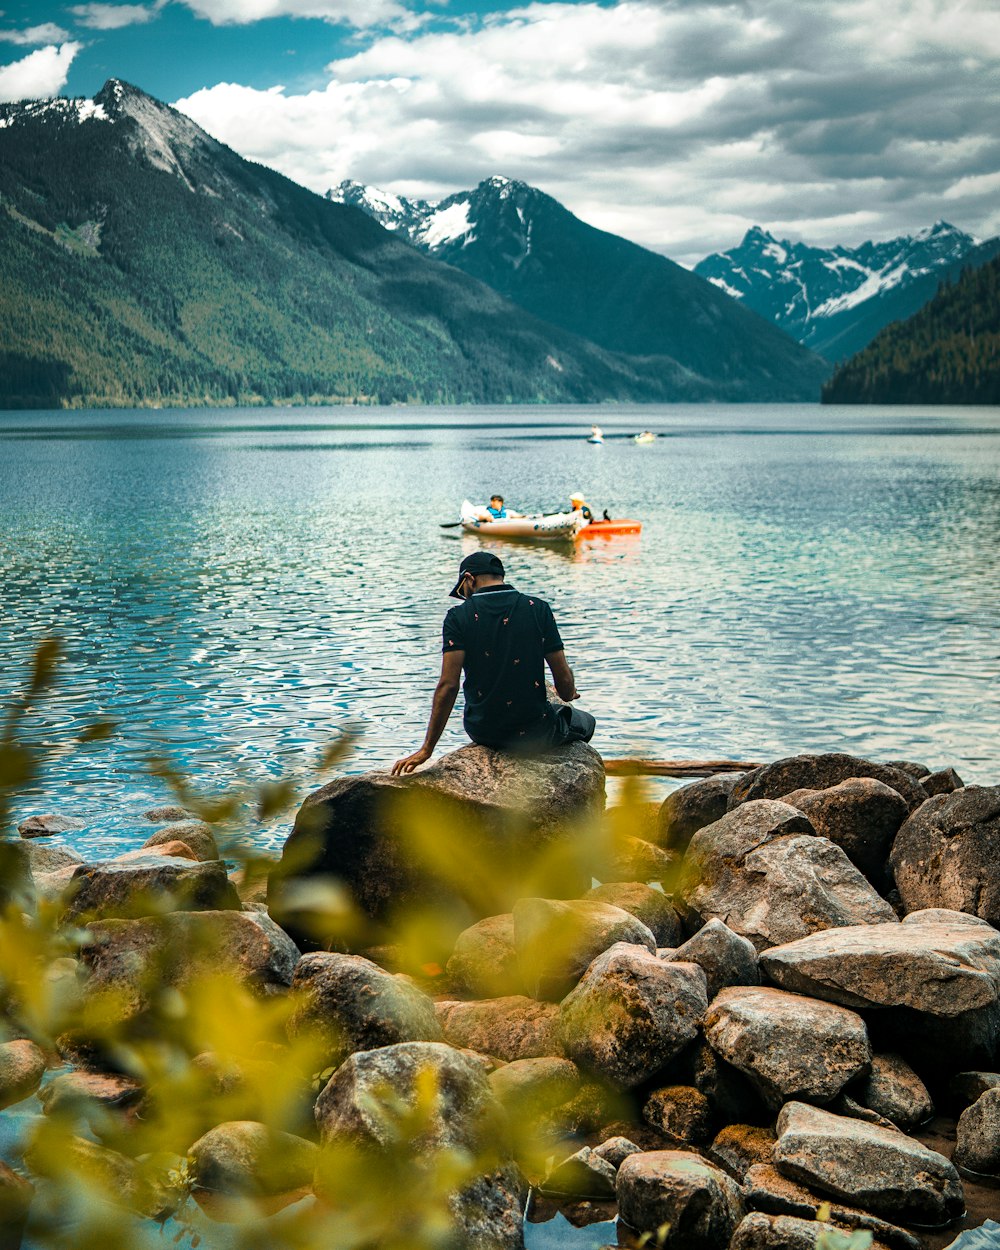 man in black shirt and black pants sitting on rock near body of water during daytime